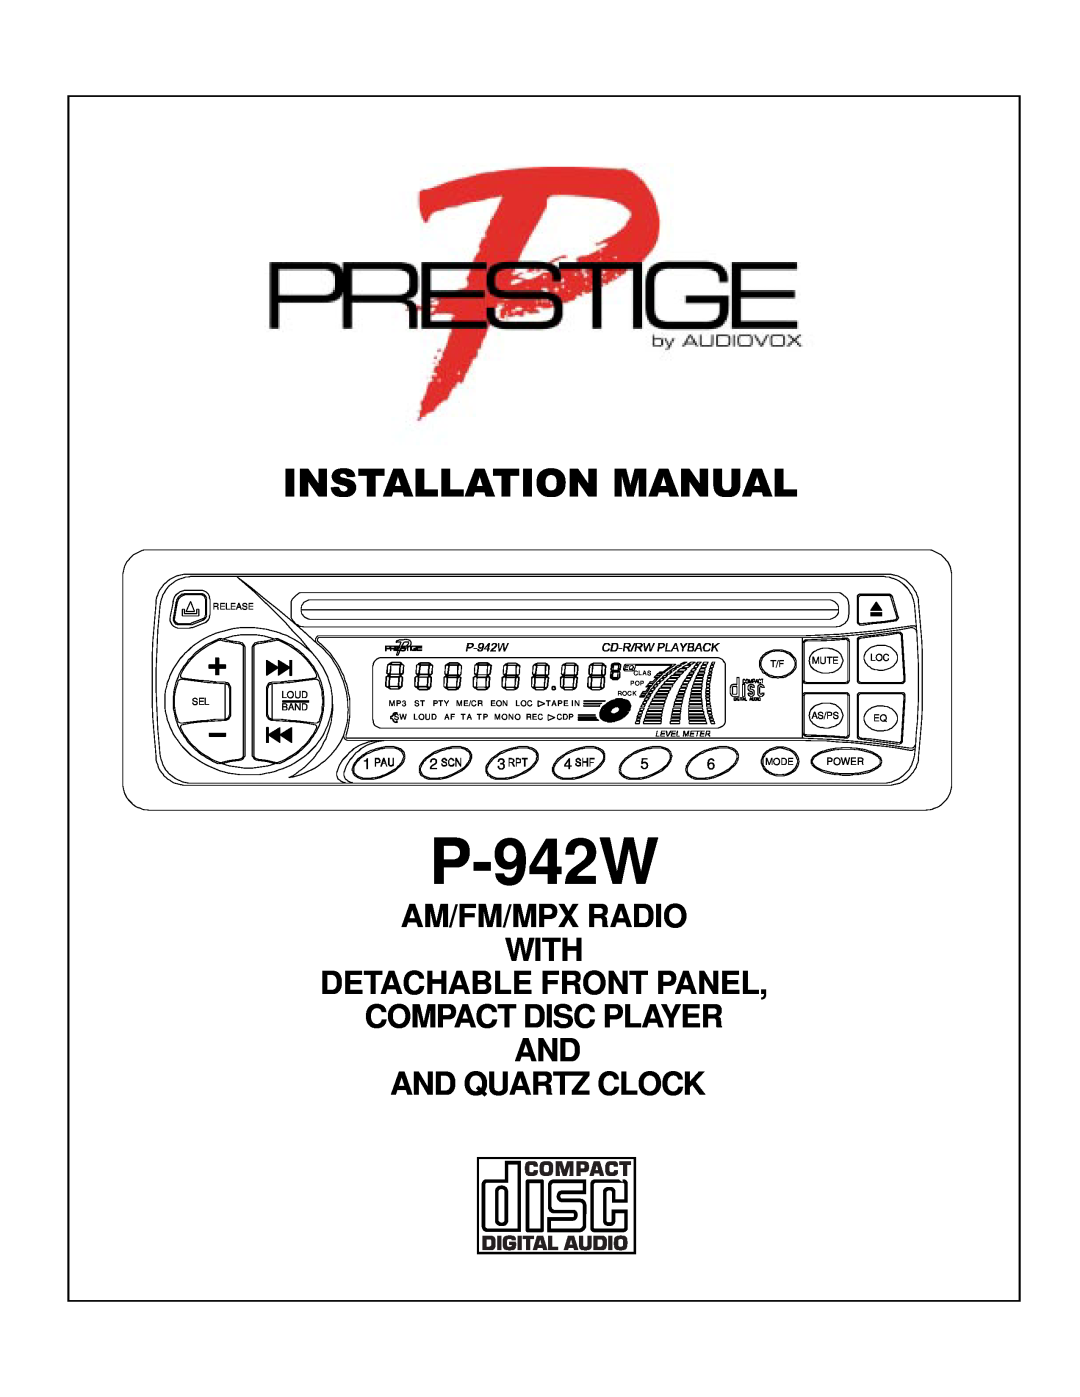 Audiovox P942W installation manual P-942W, Installation Manual, Am/Fm/Mpx Radio, With, Detachable Front Panel, Power 